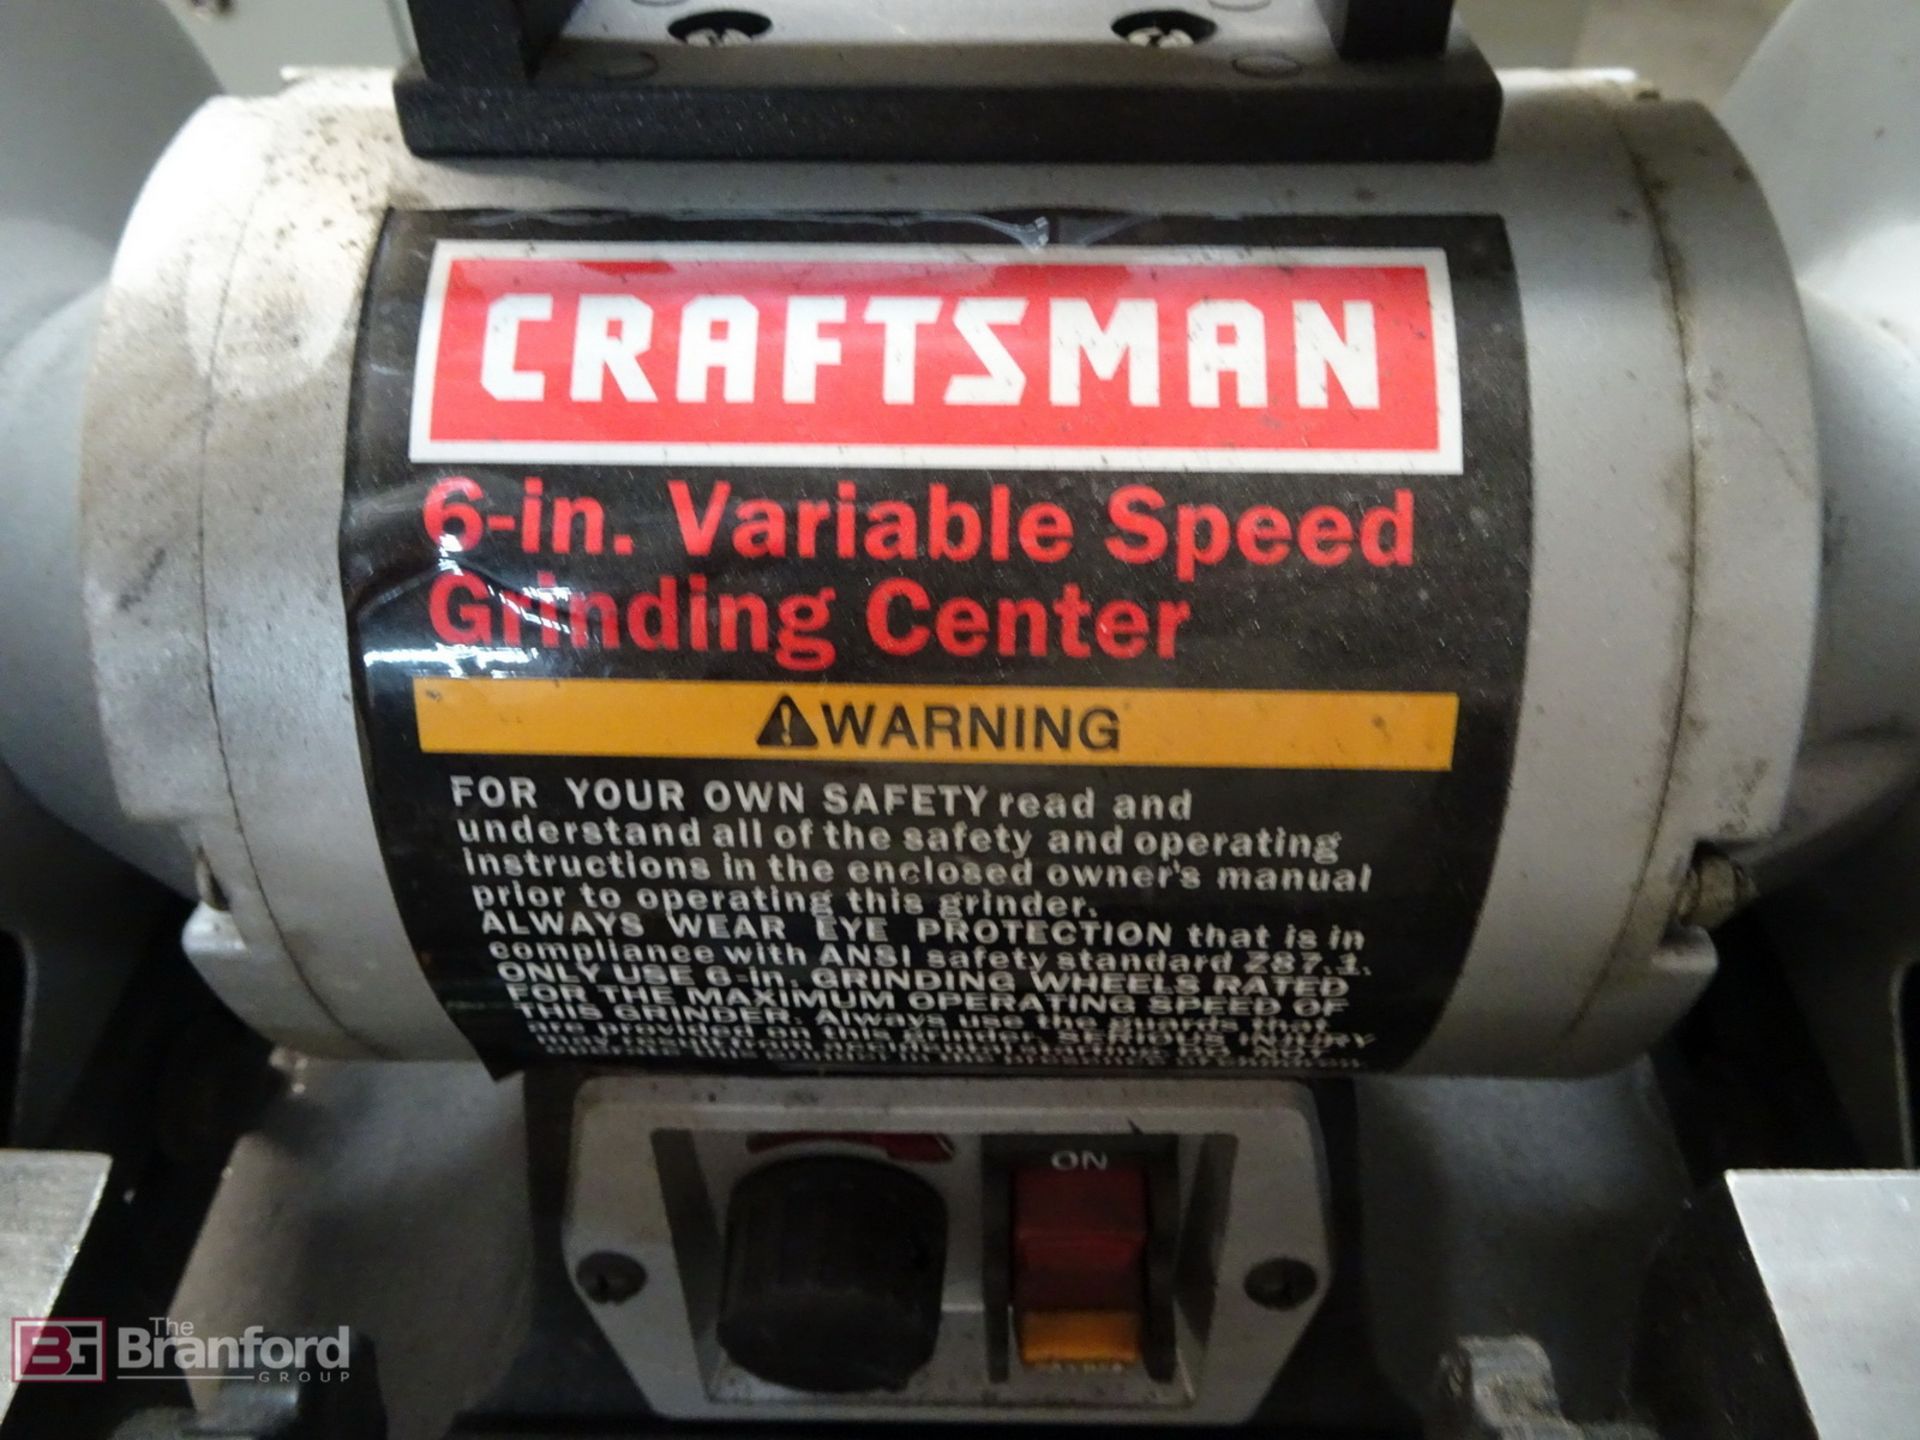 Craftsman 6" Variable Speed Grinding Center - Image 3 of 3